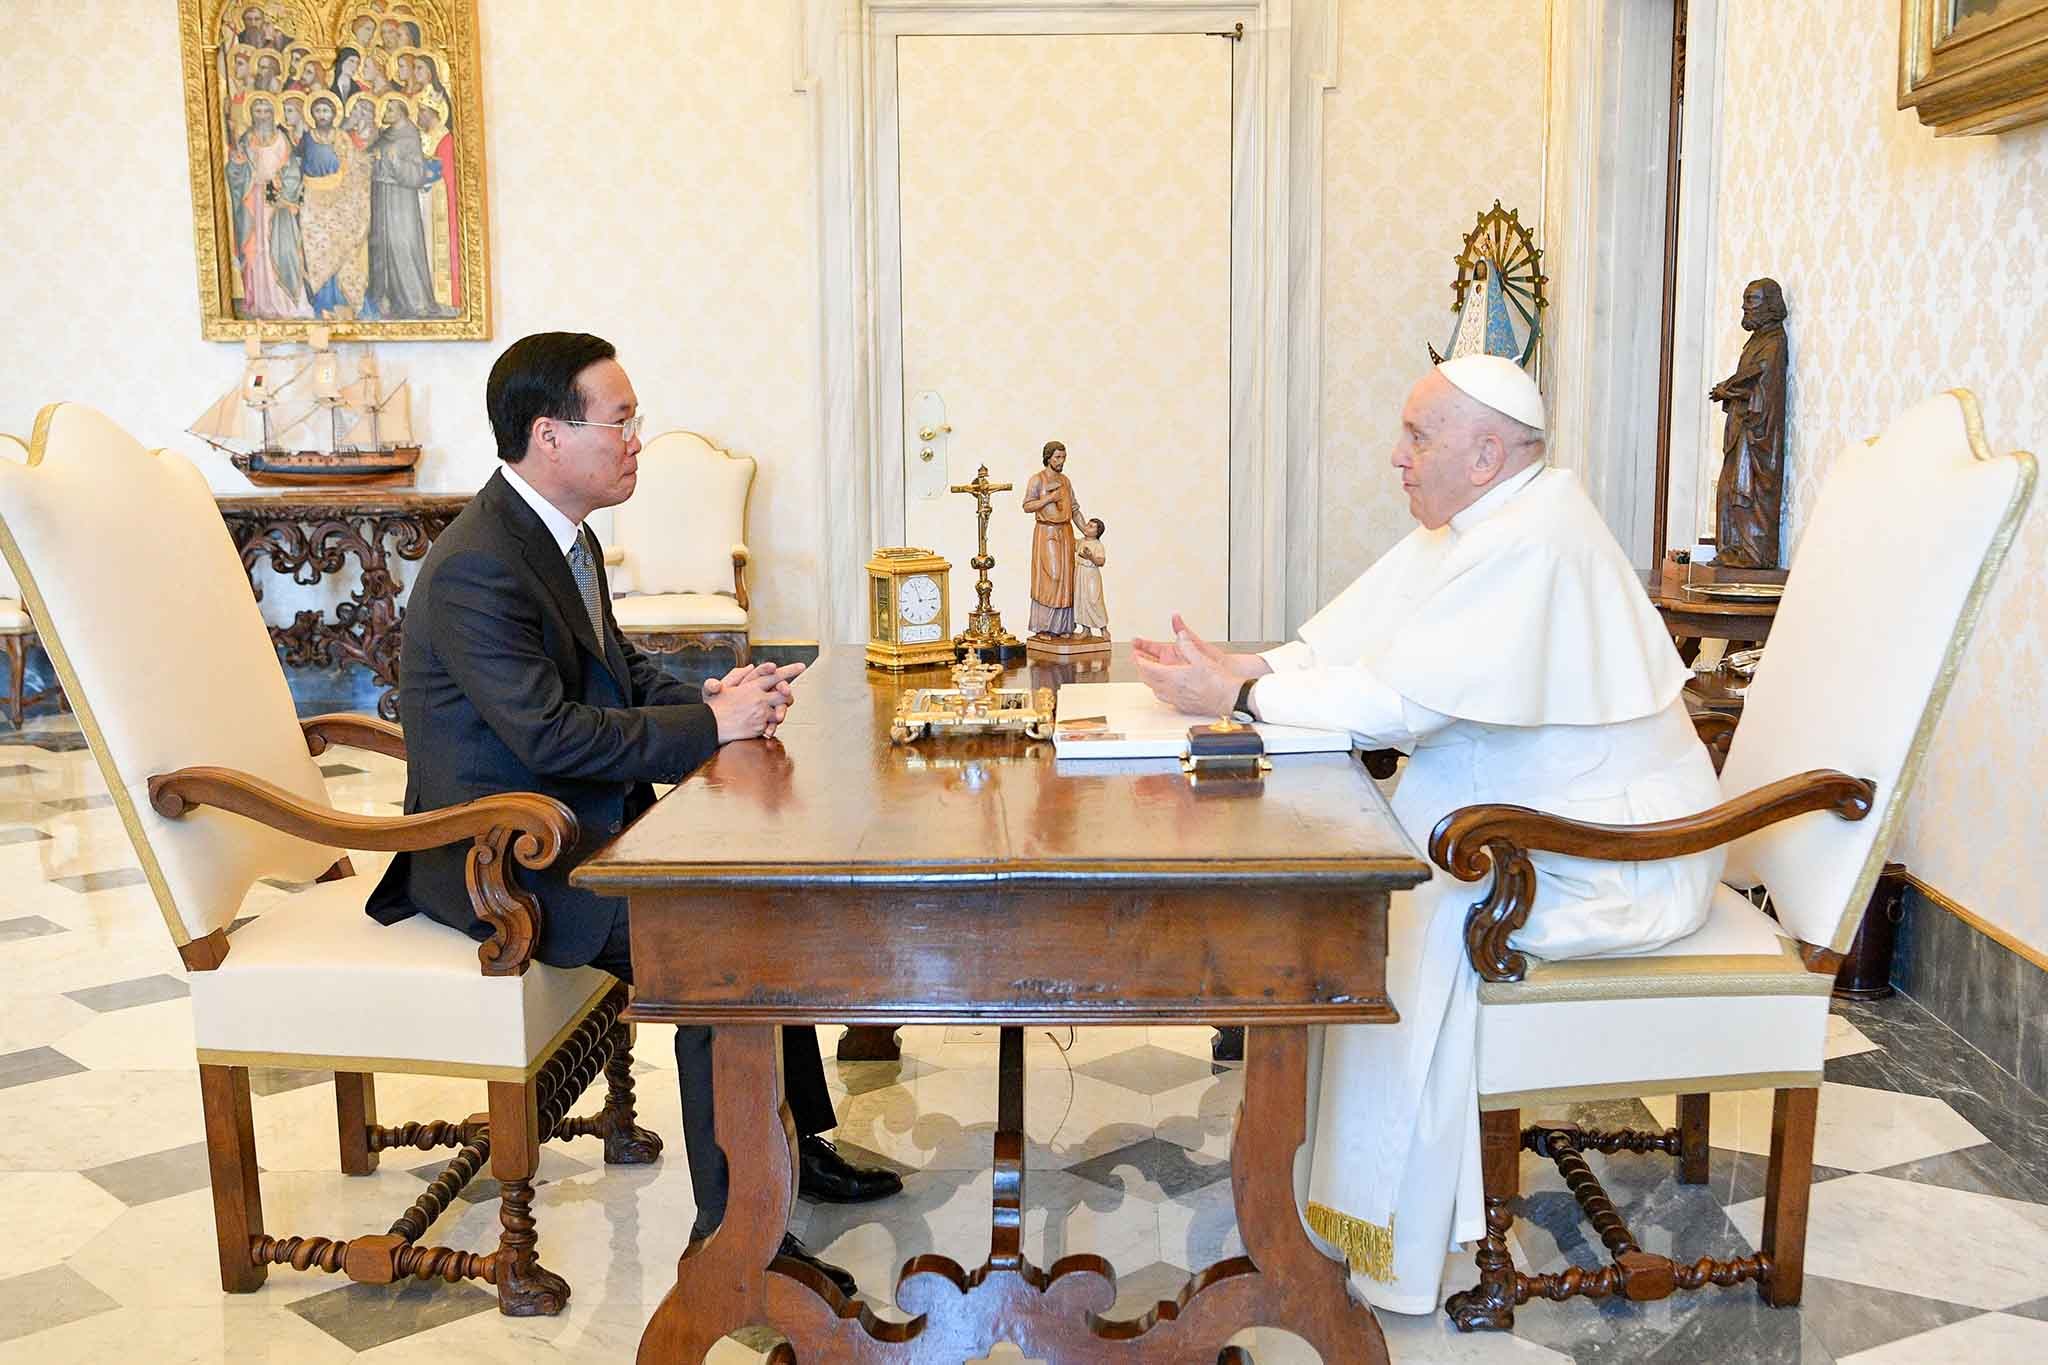 President Vo Van Thuong visits the Vatican, meets with Pope Francis